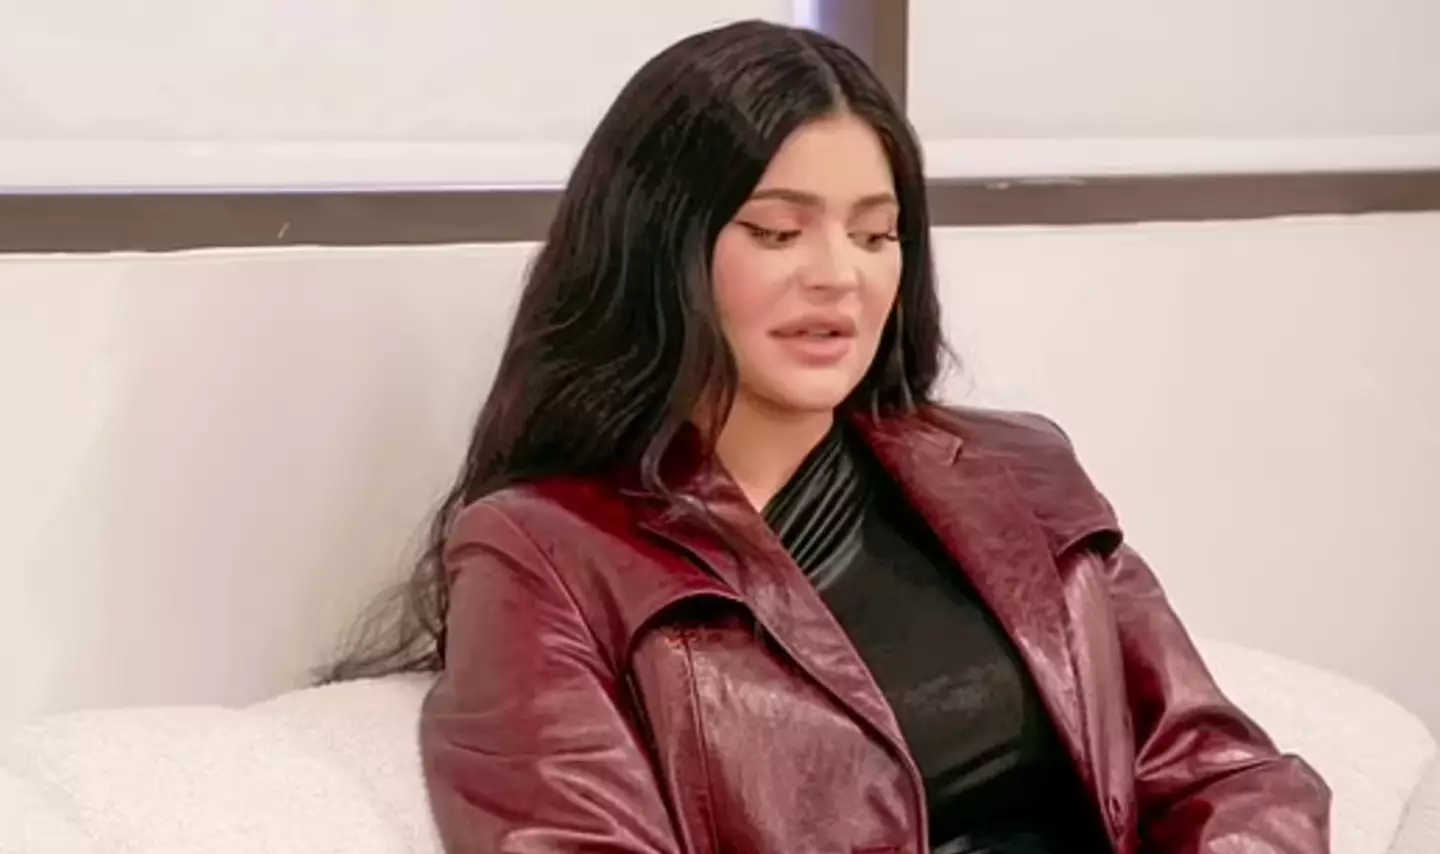 Kylie Jenner said she cried for weeks after her son was born.